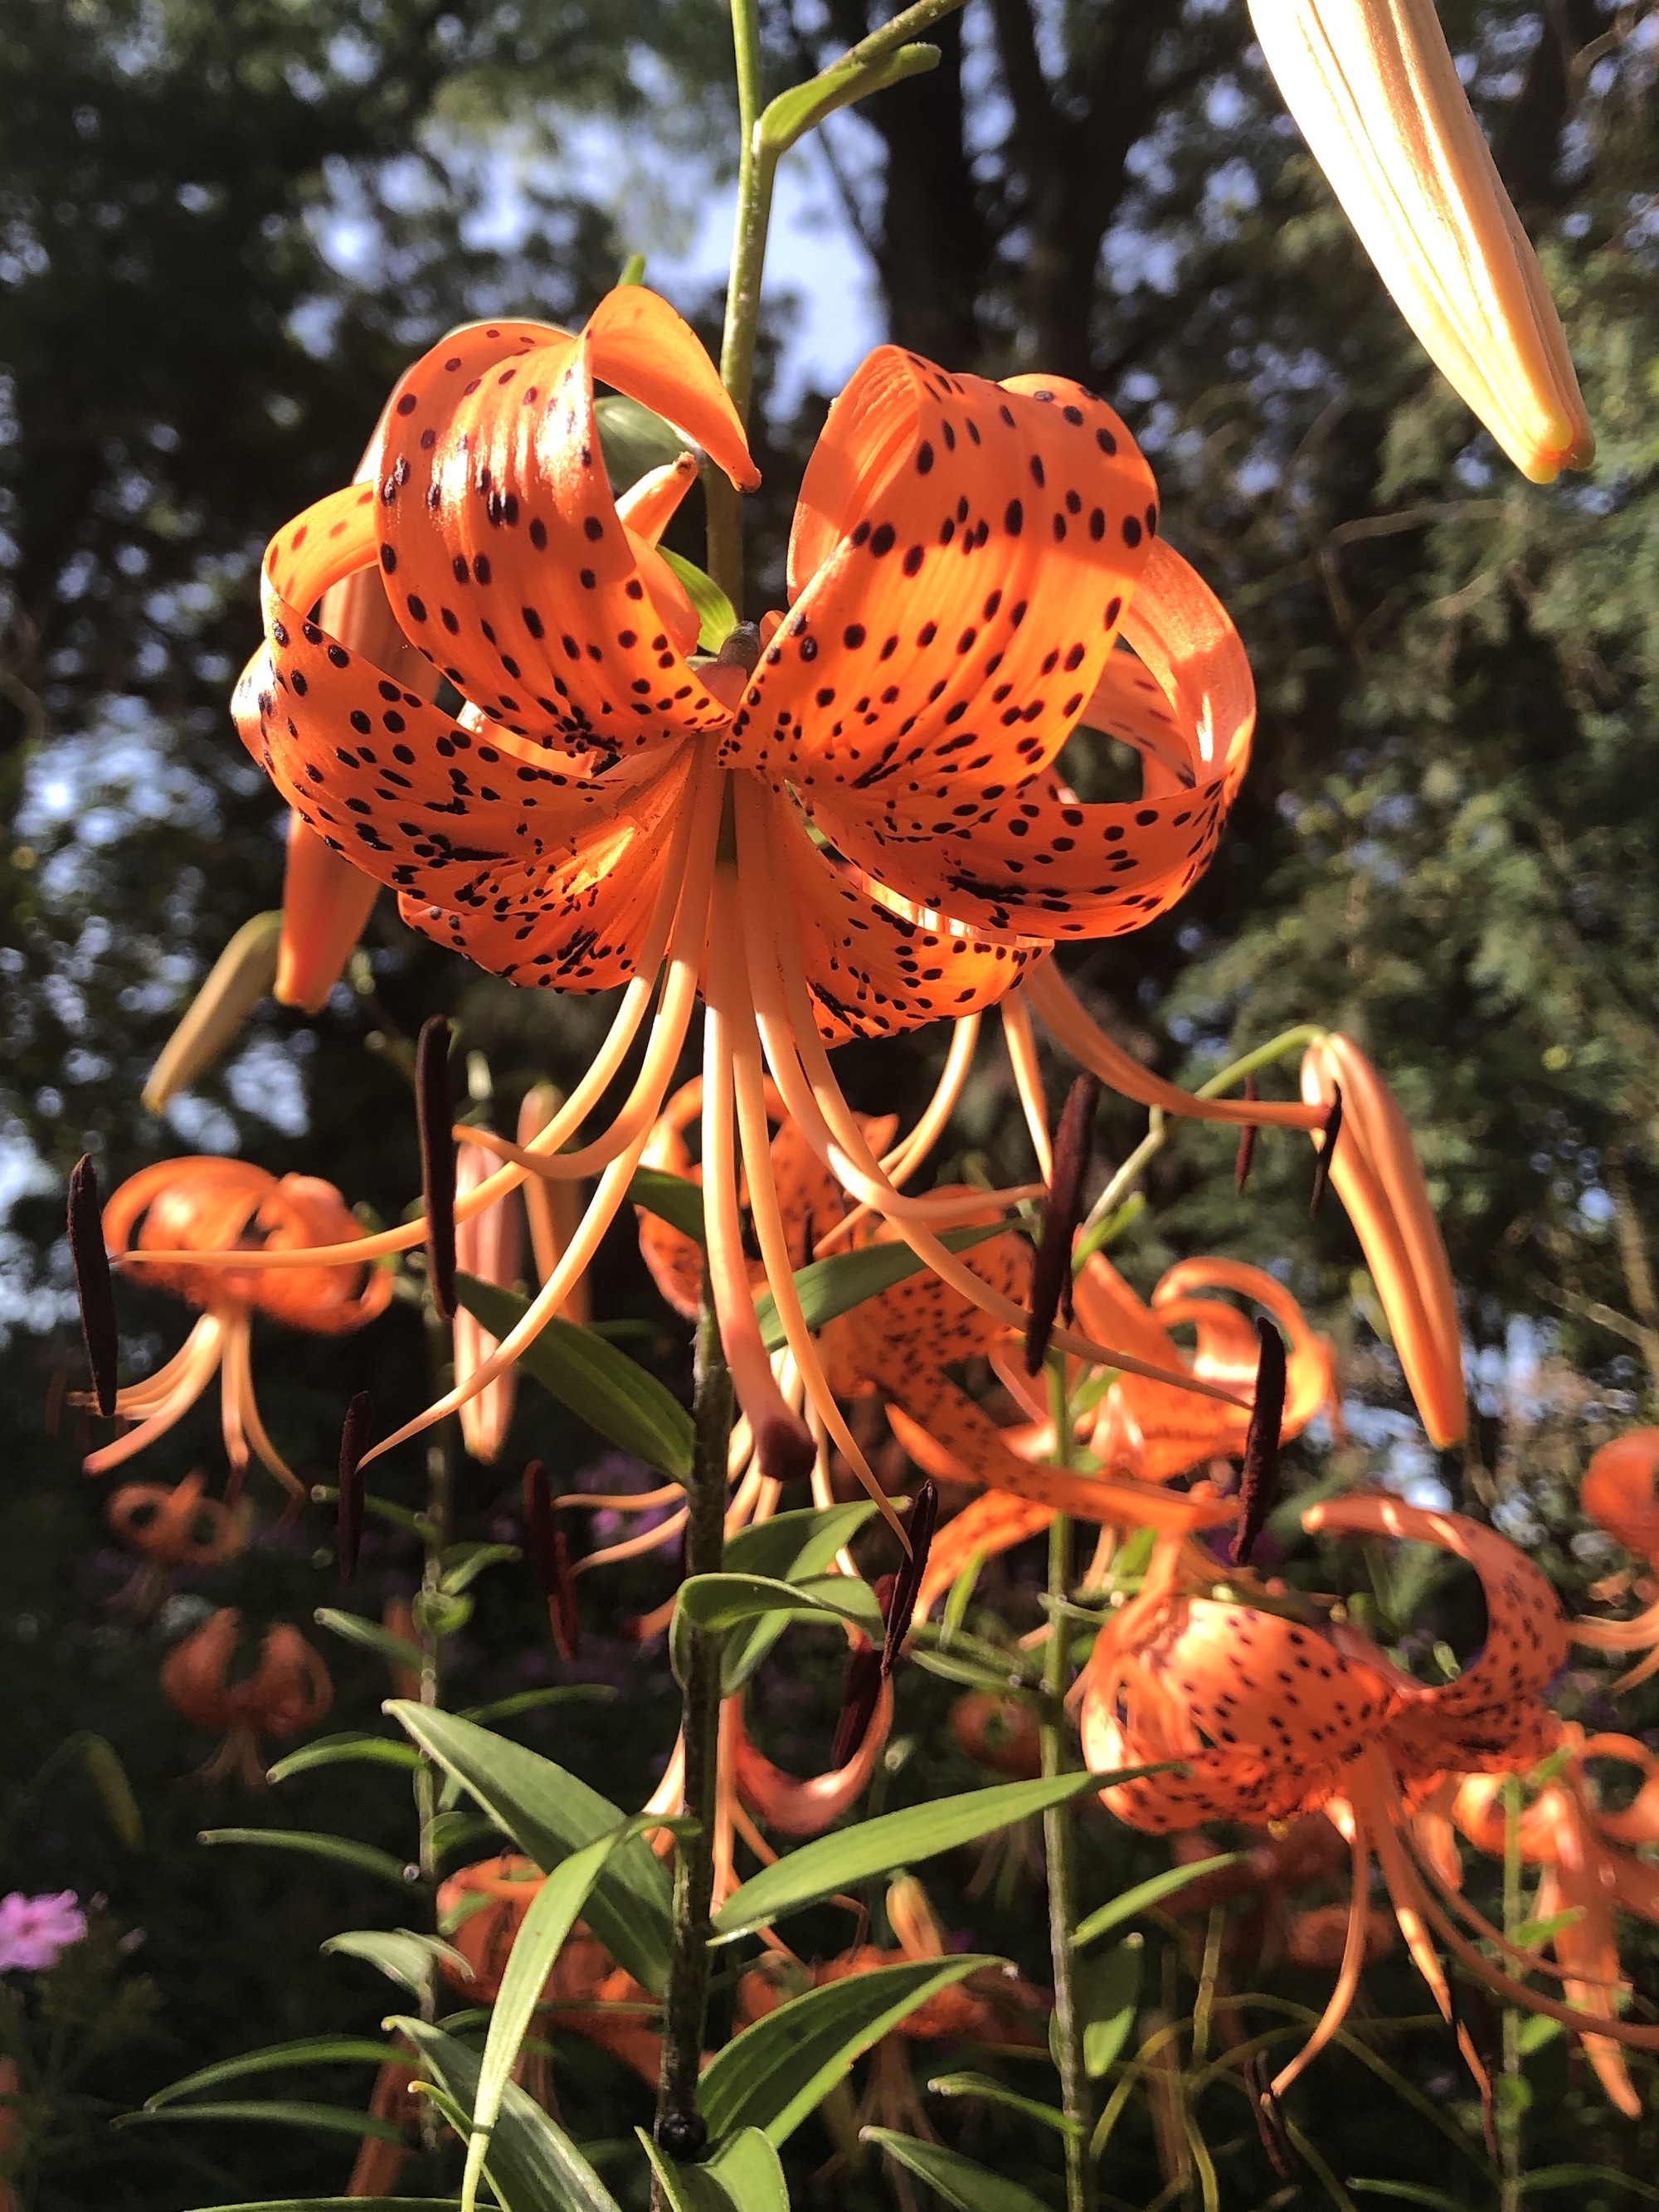 Tiger Lily near the Duck Pond on July 26, 2020.